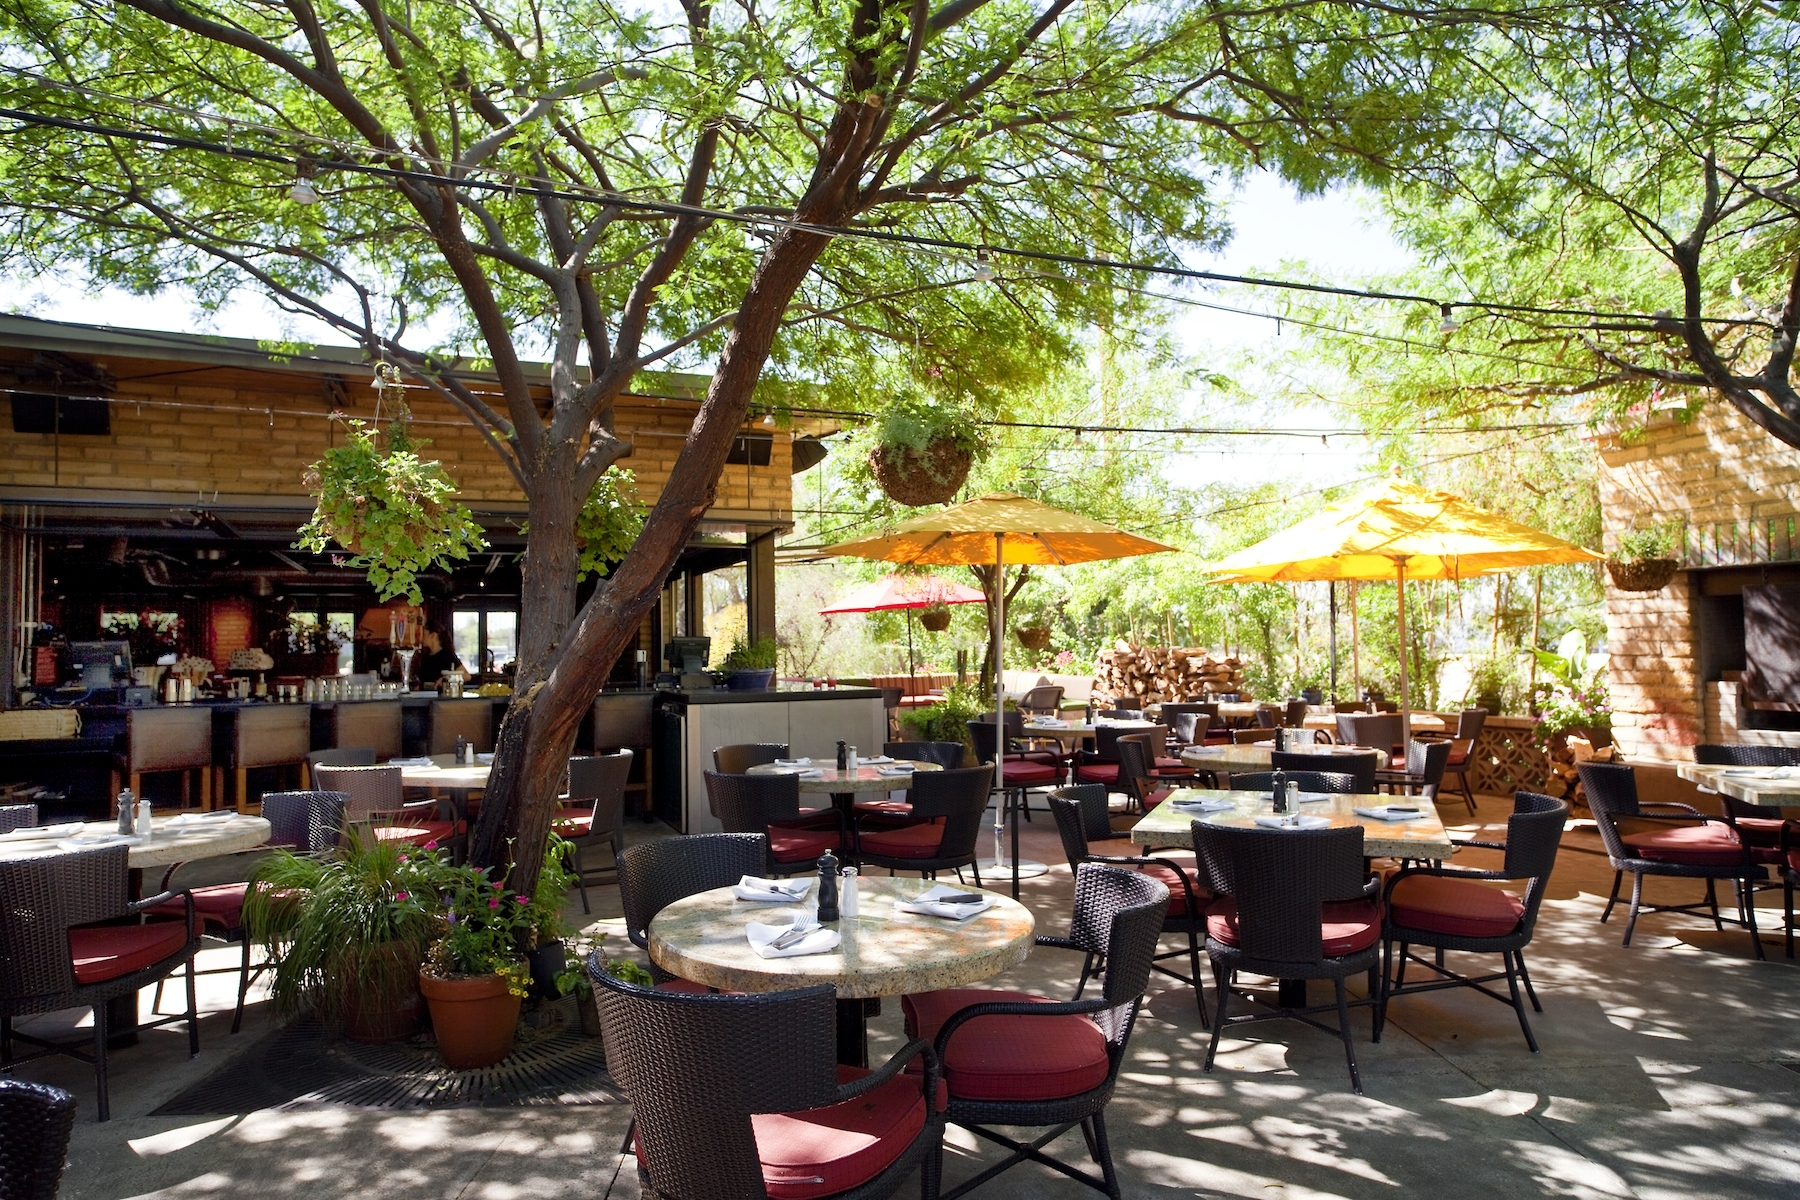 Here are 15 great outdoor dining options in Arizona - AZ Big Media